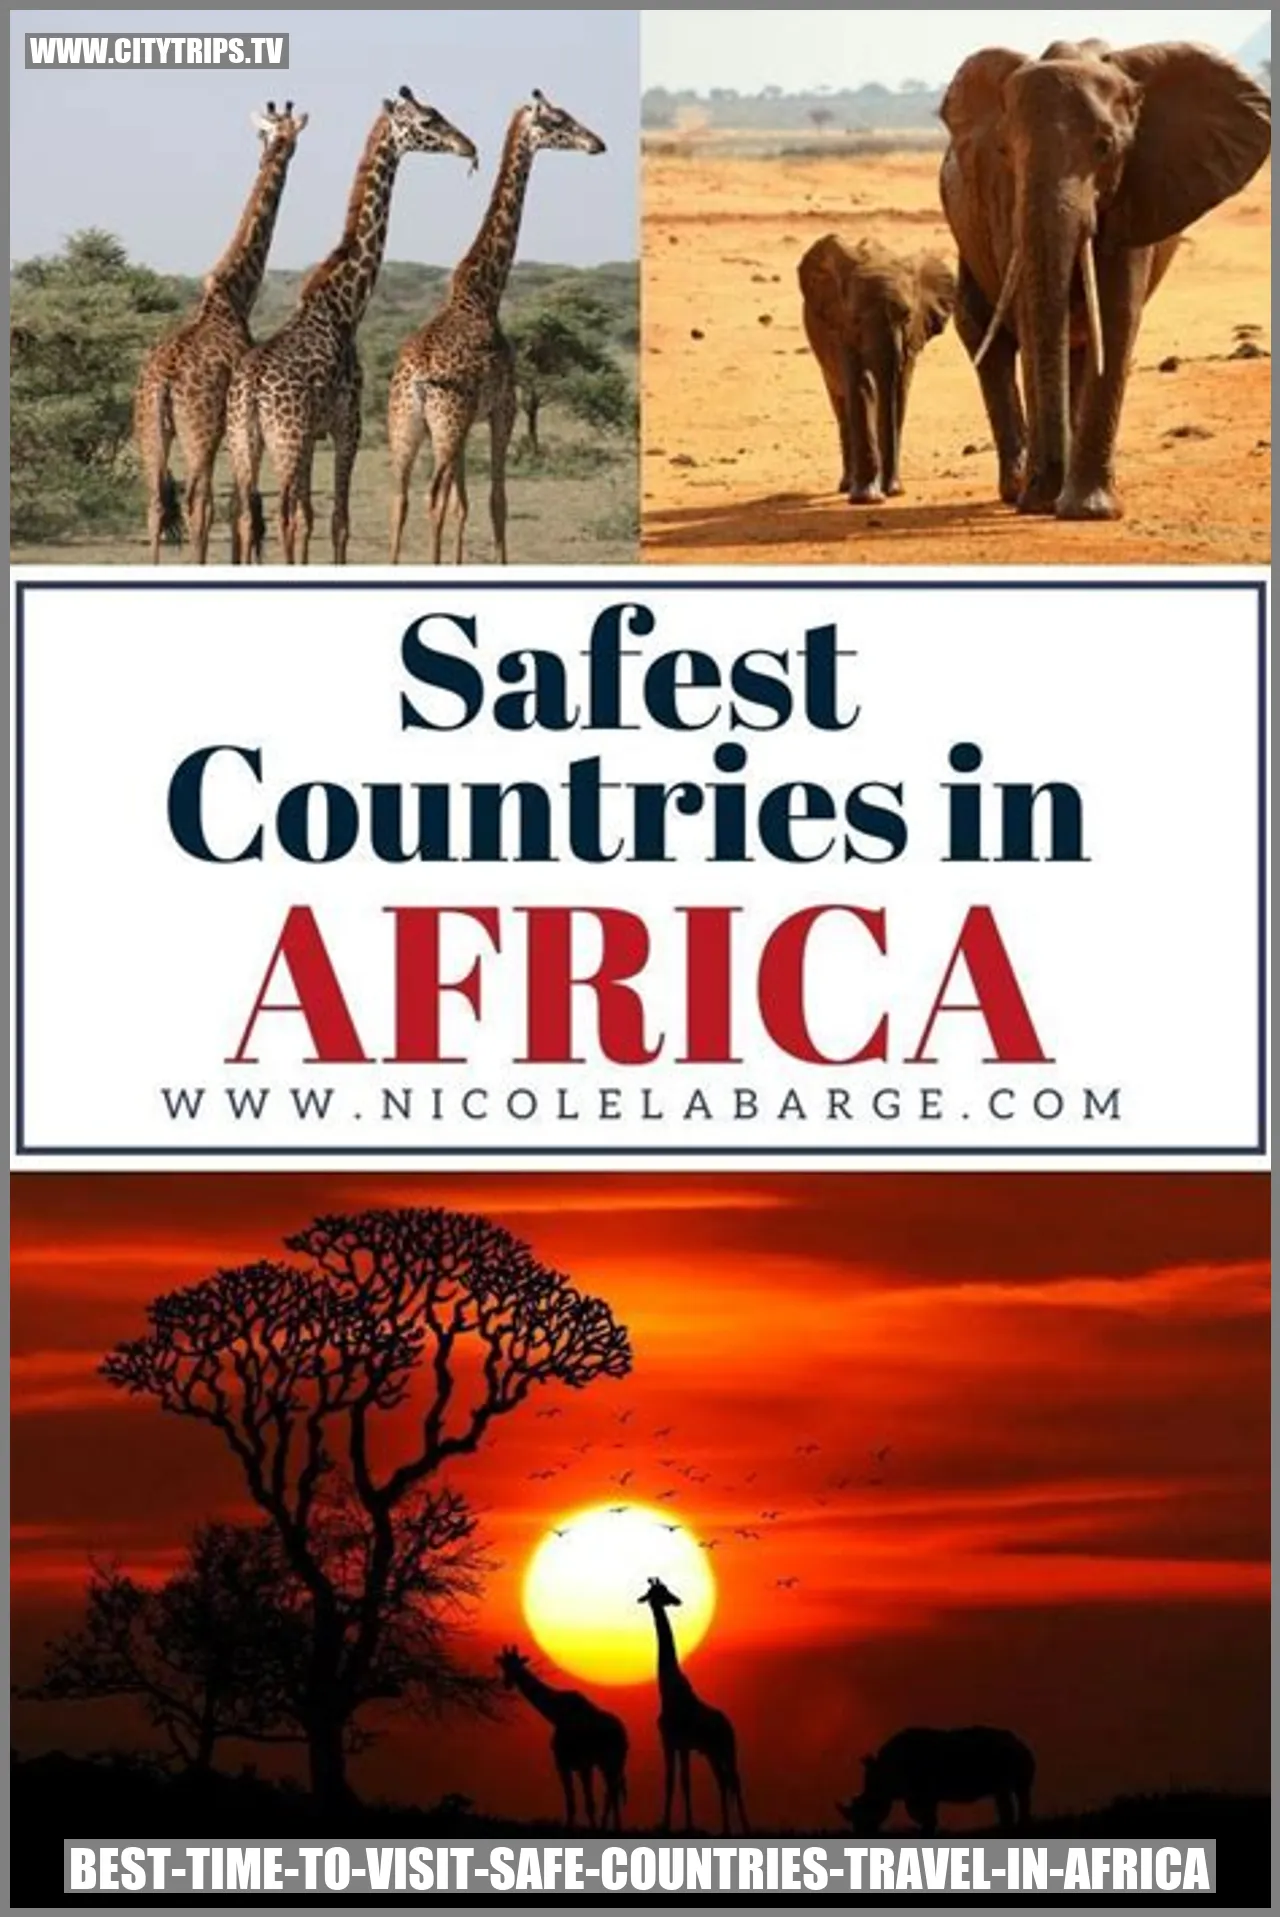 Best Time to Visit African Countries